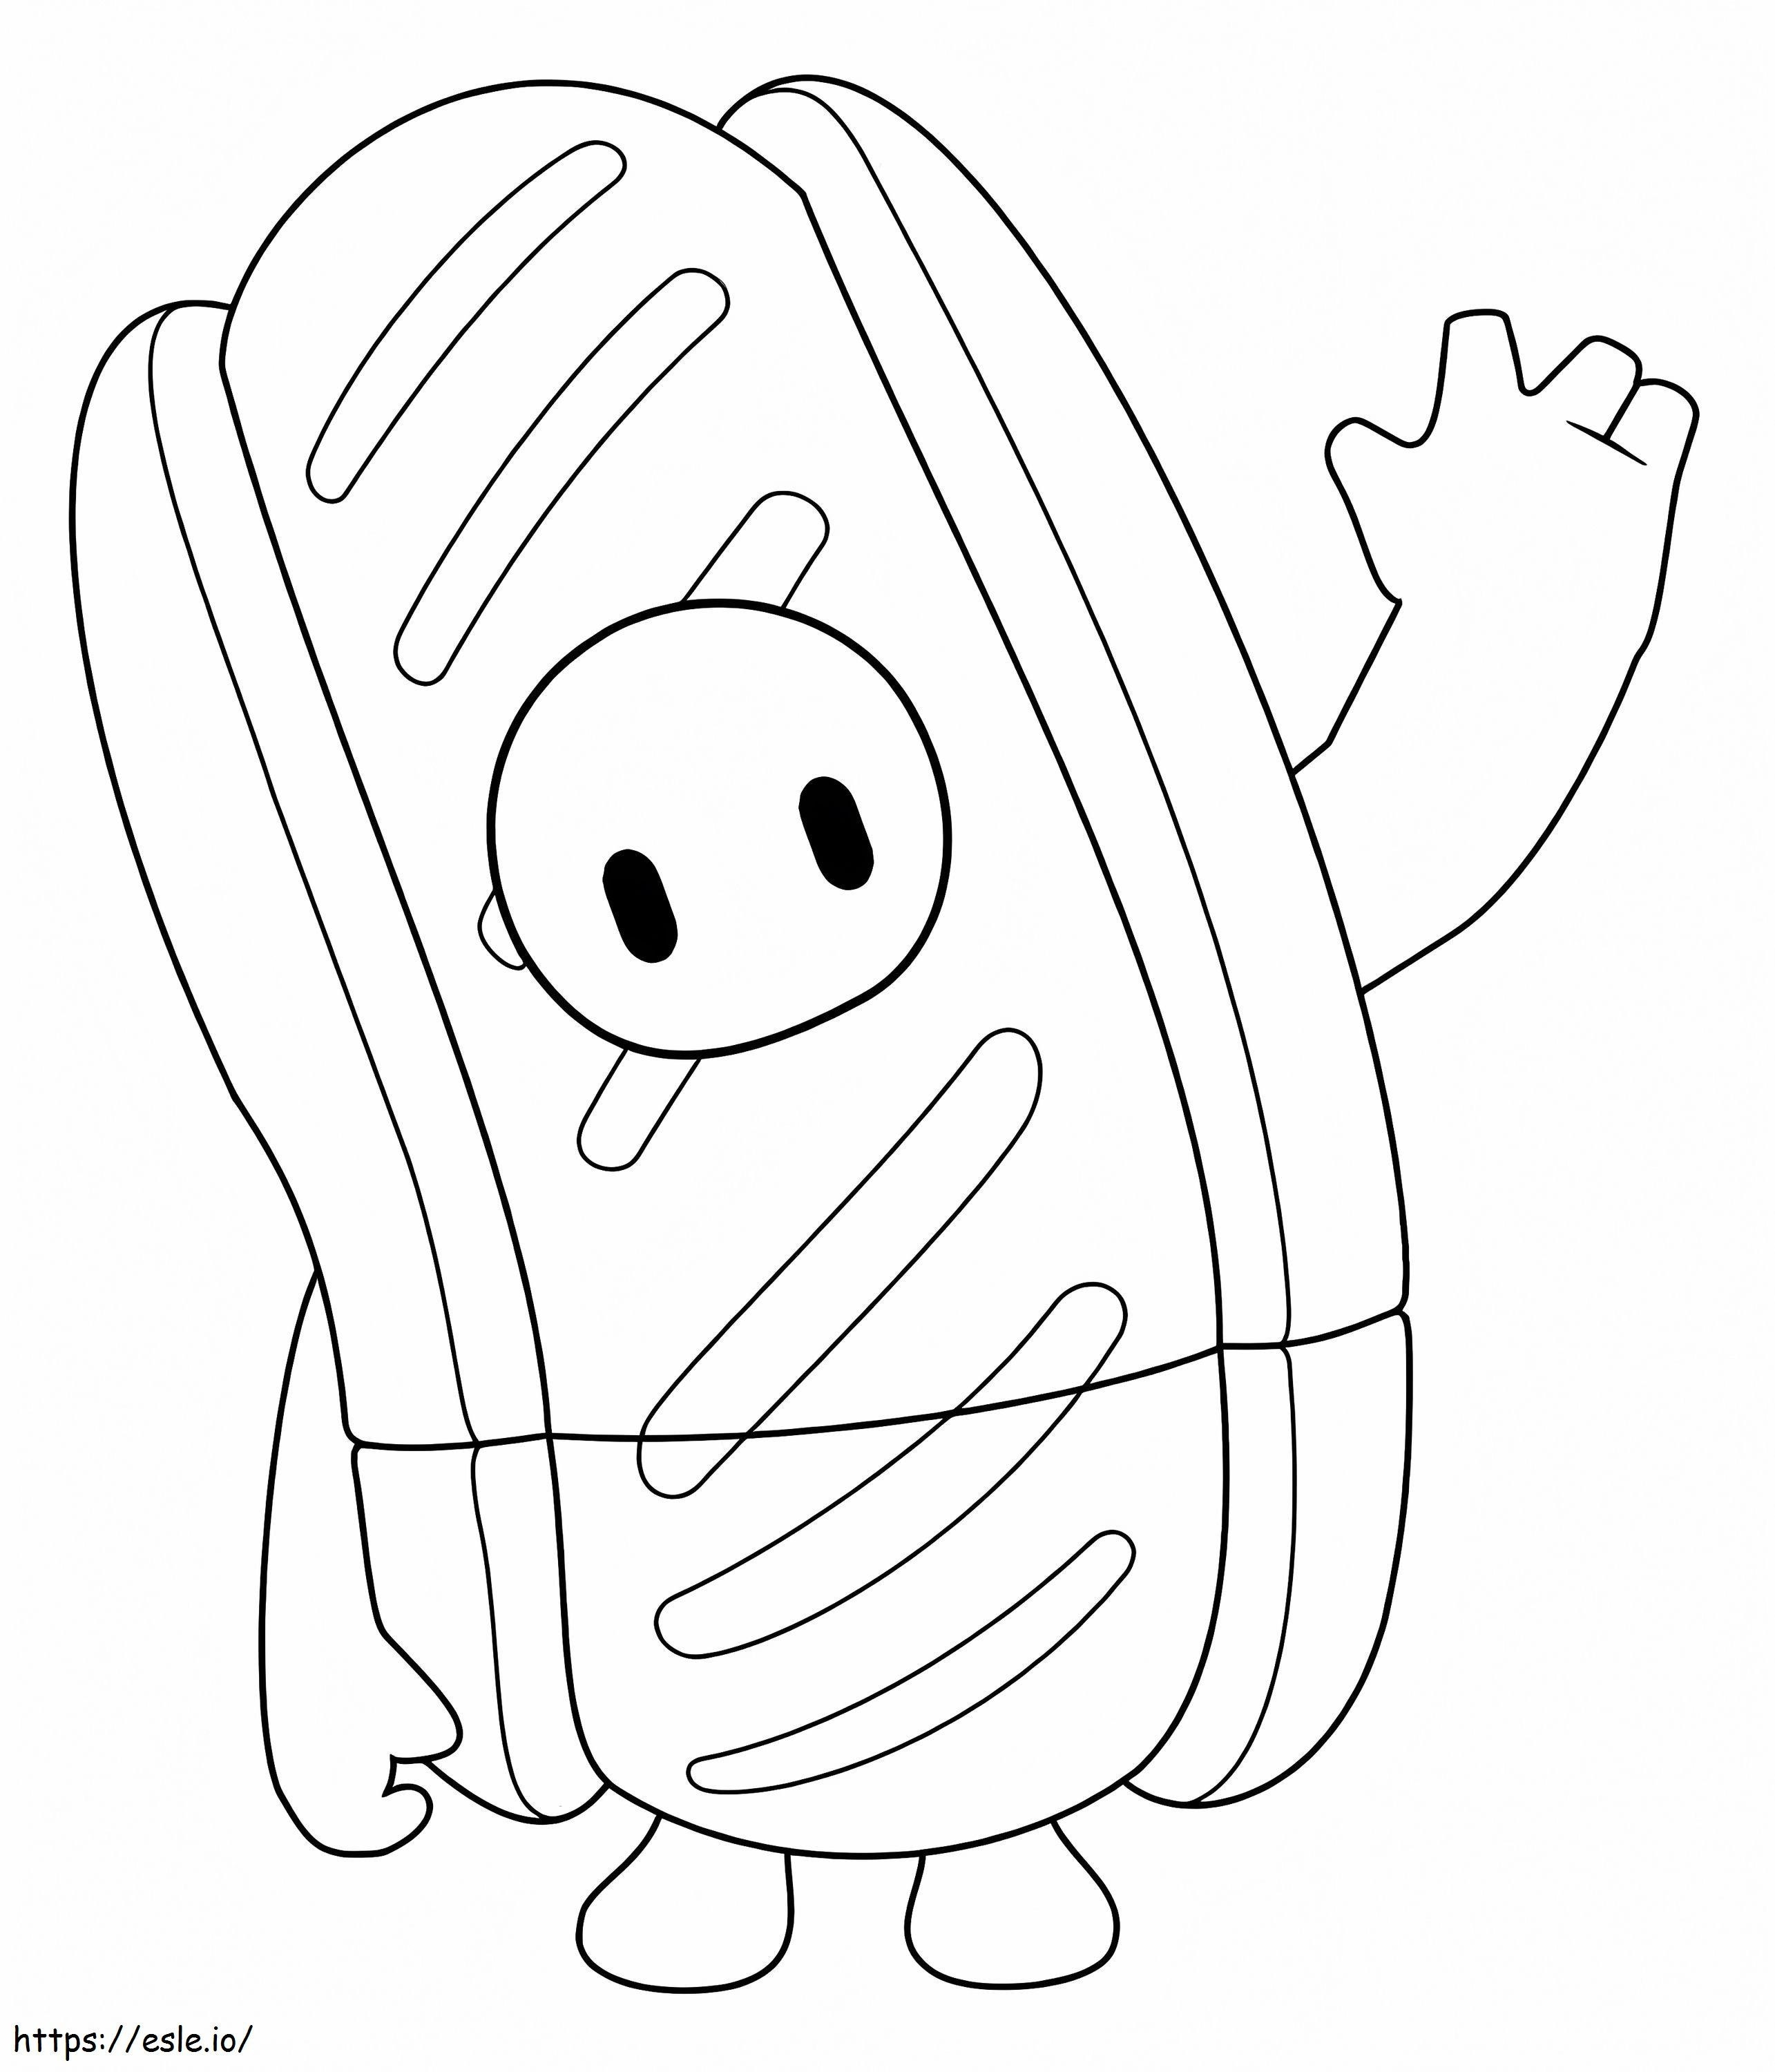 Knights Of The Hot Dog Skin Fall coloring page